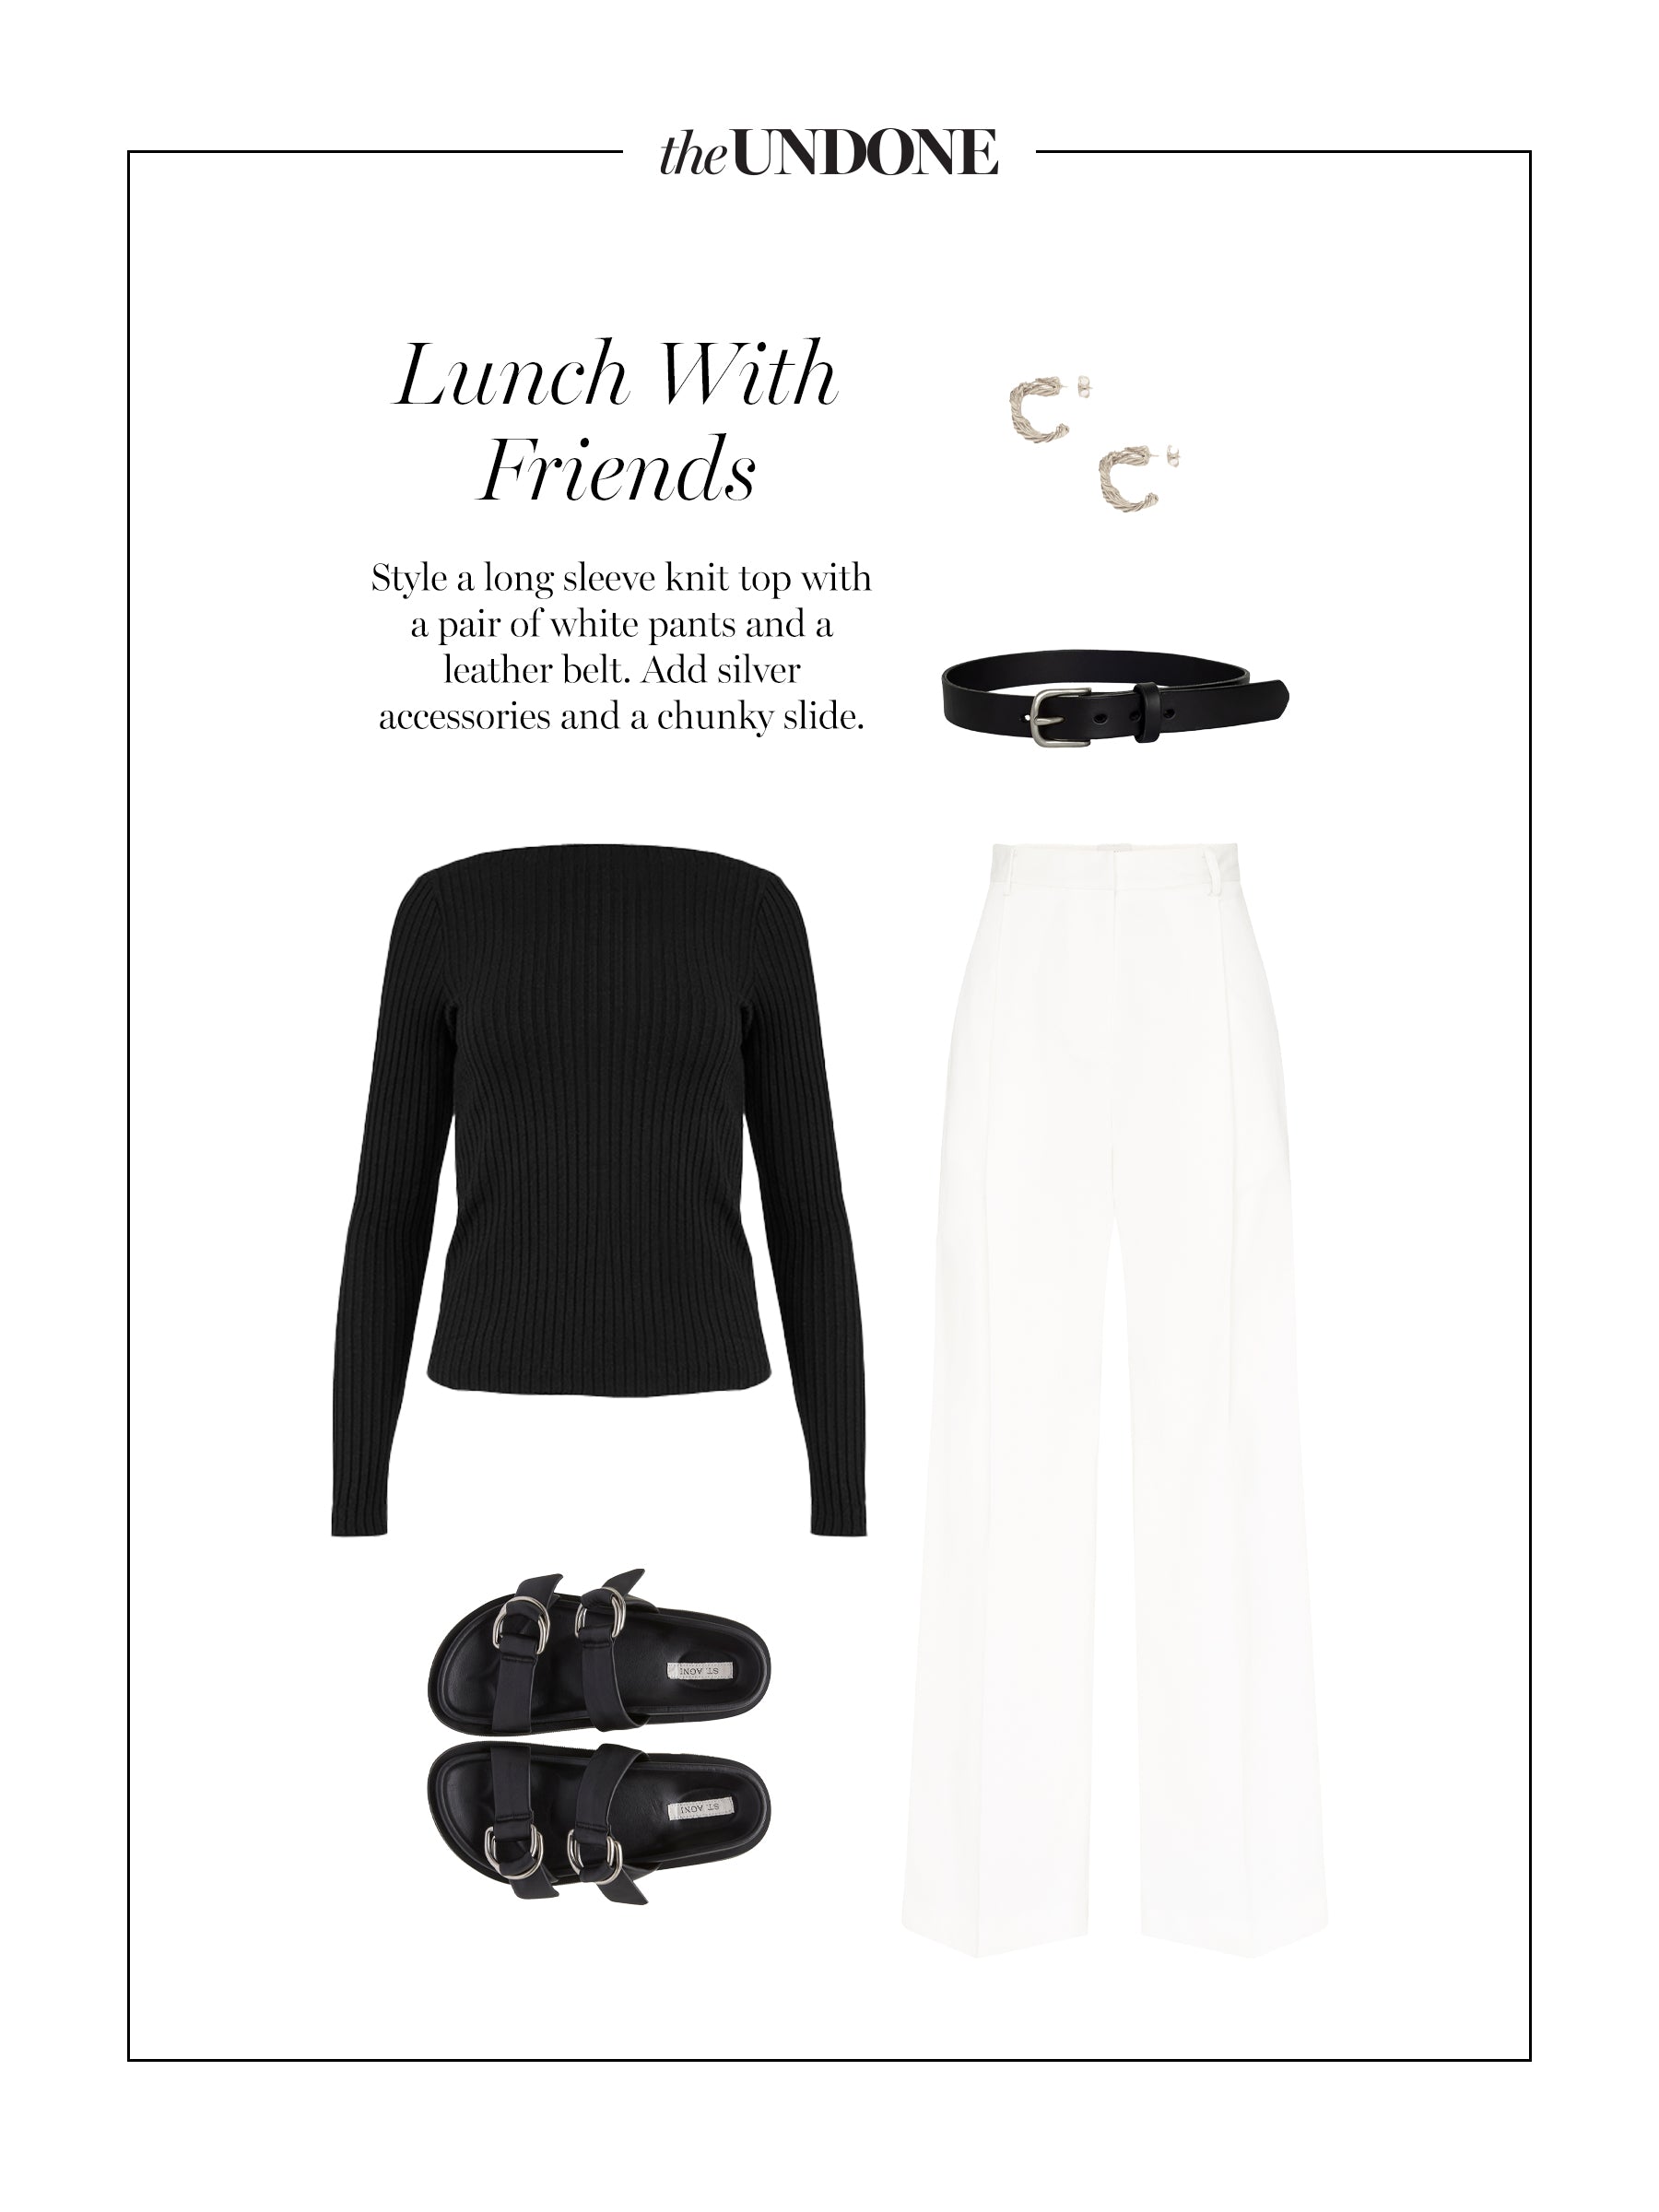 Lunch With Friends Outfit Idea | The UNDONE